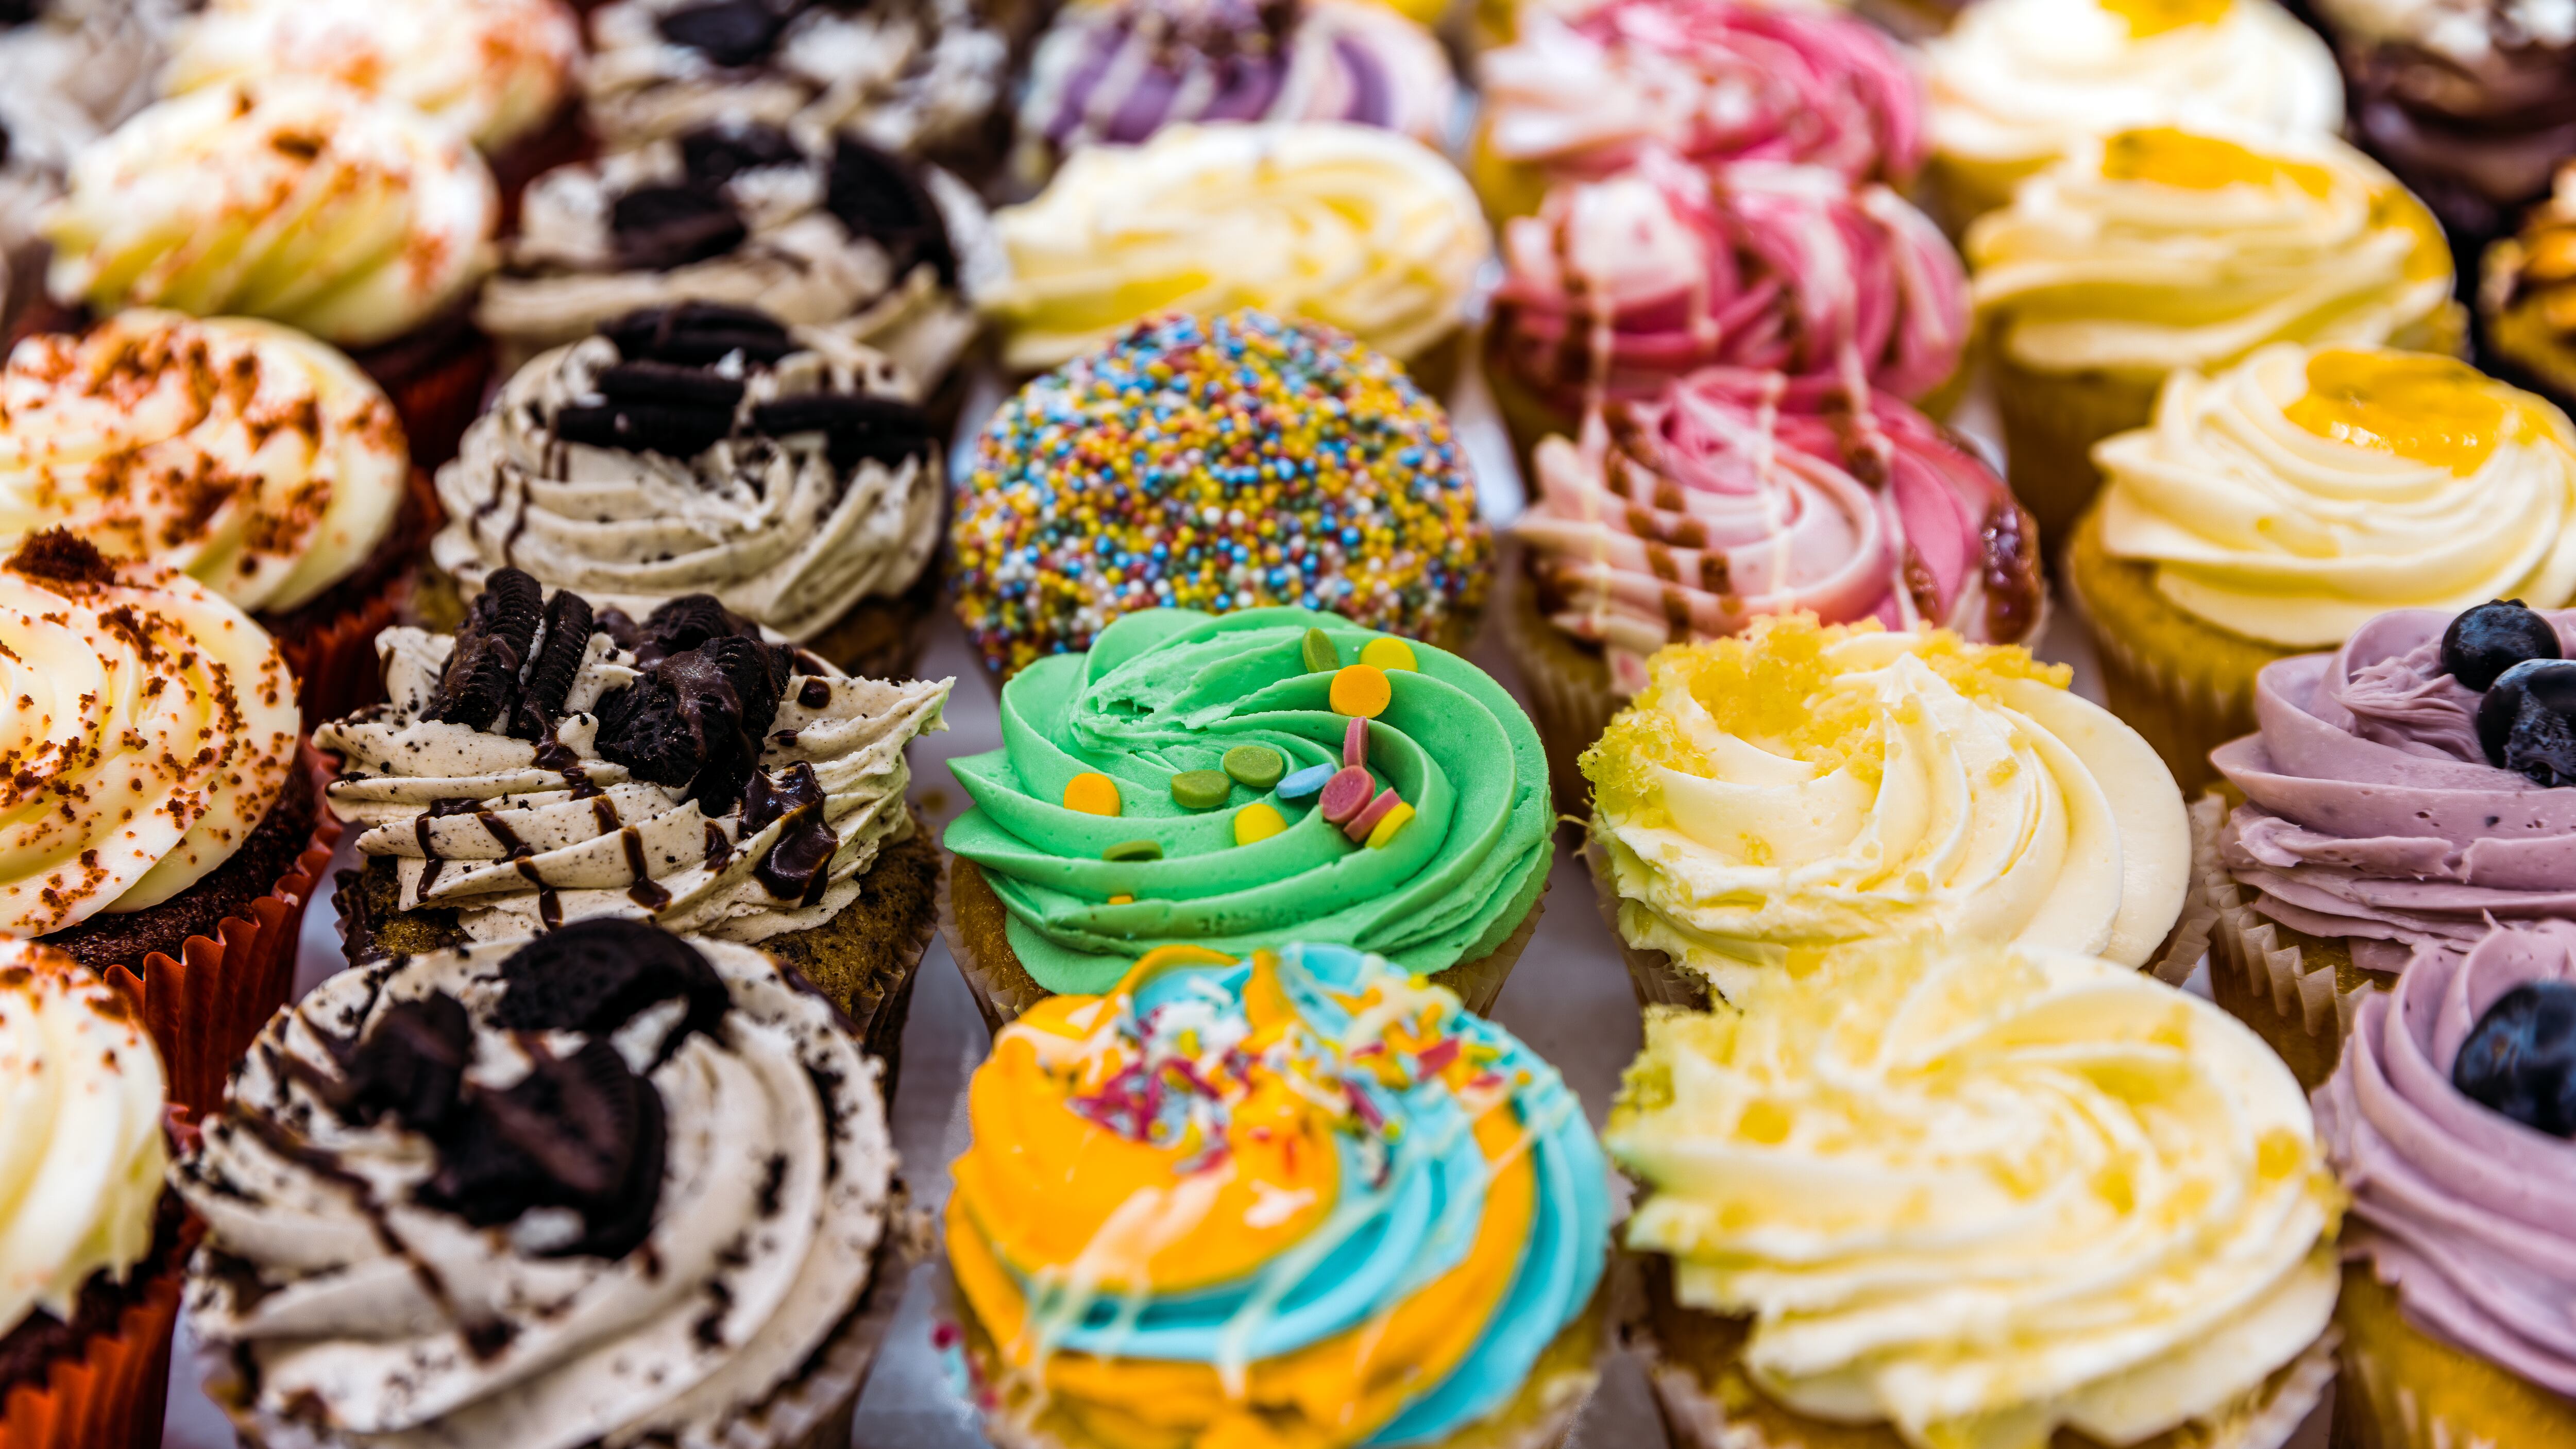 Multi-colored vibrant cupcakes for sale at the bakery